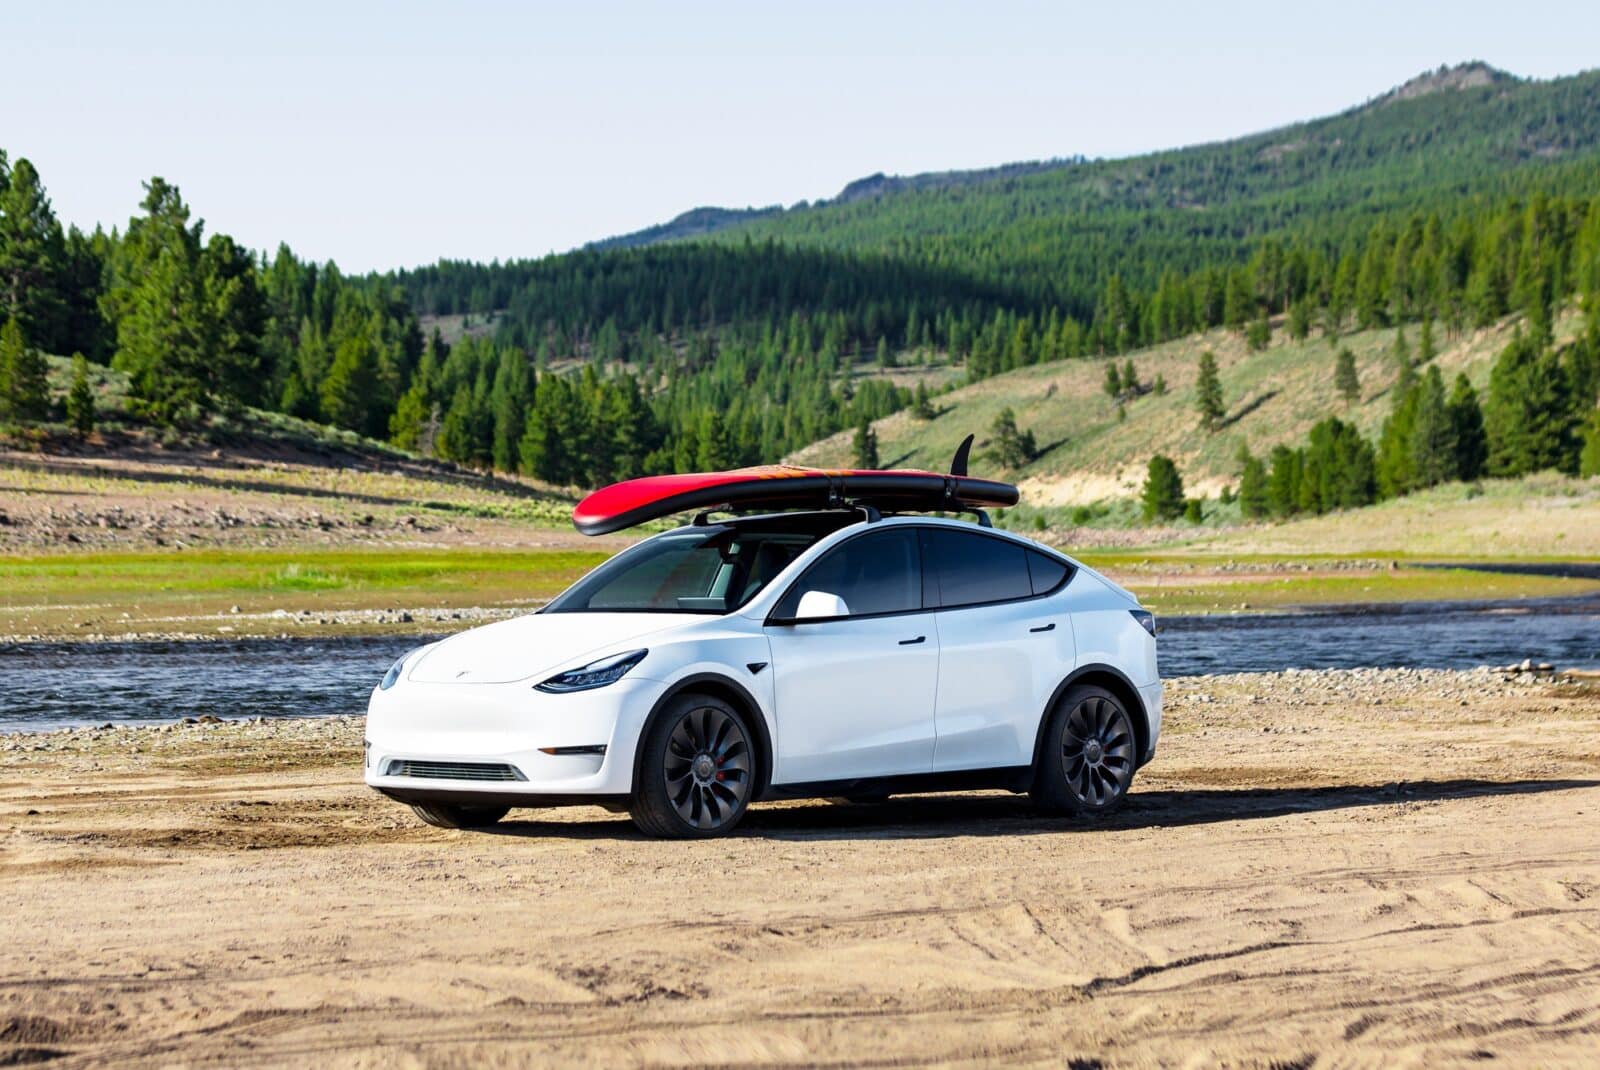 New Hampshire Welcomes Tesla: Approval Granted For First Sales Center Model Y. Photo Courtesy Of Tesla, Inc.